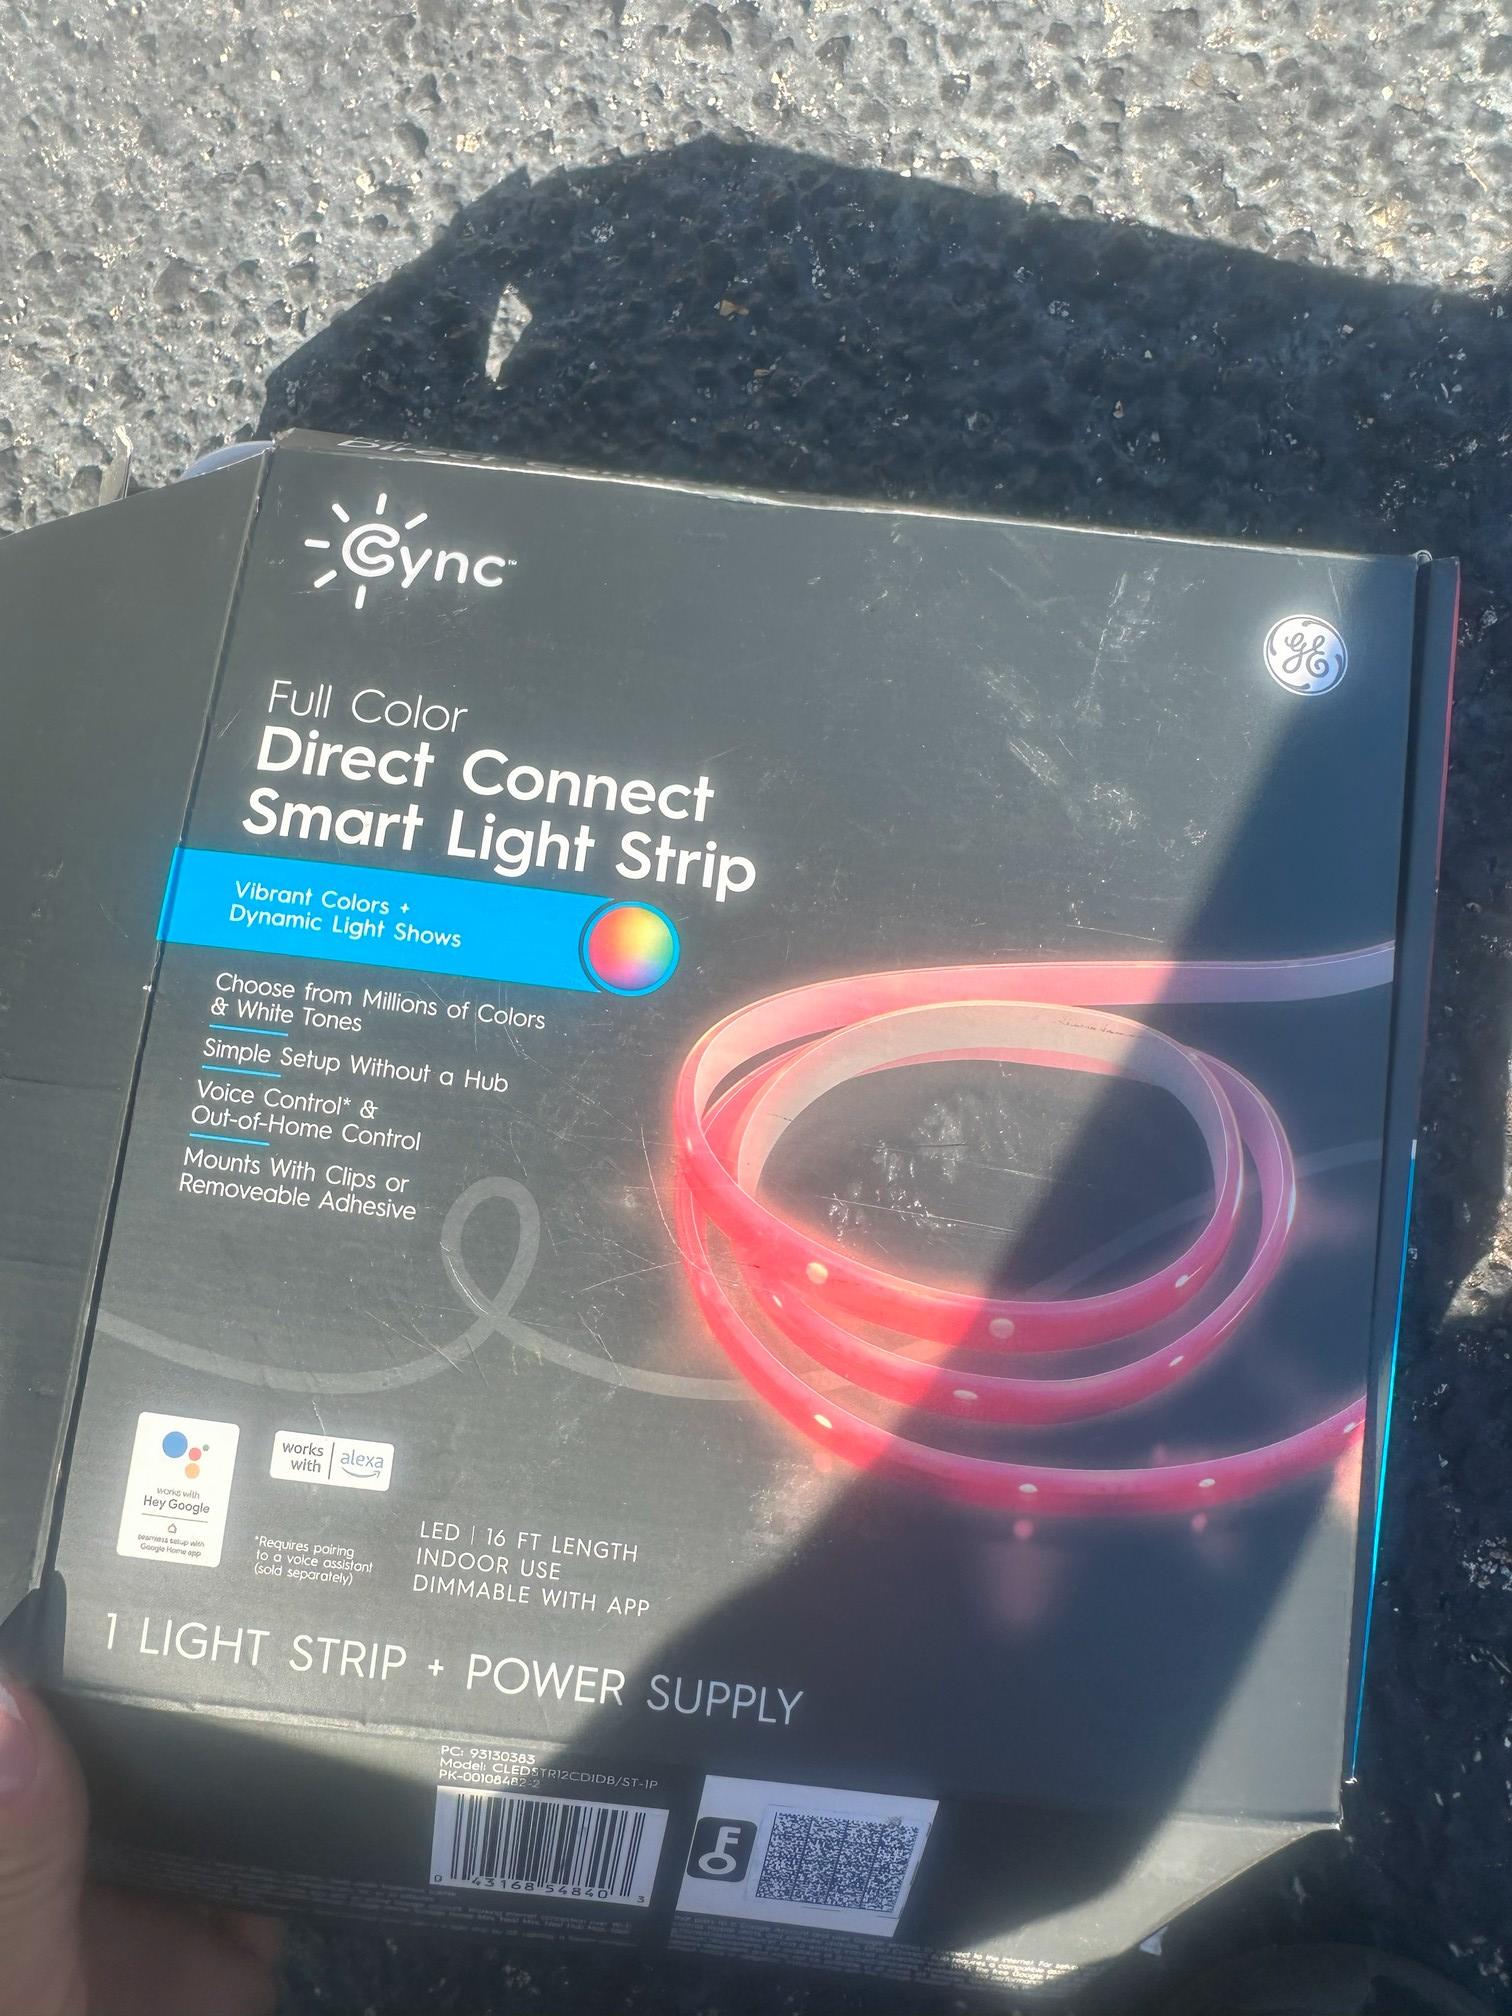 Full Color Direct Connect Smart Light Strip